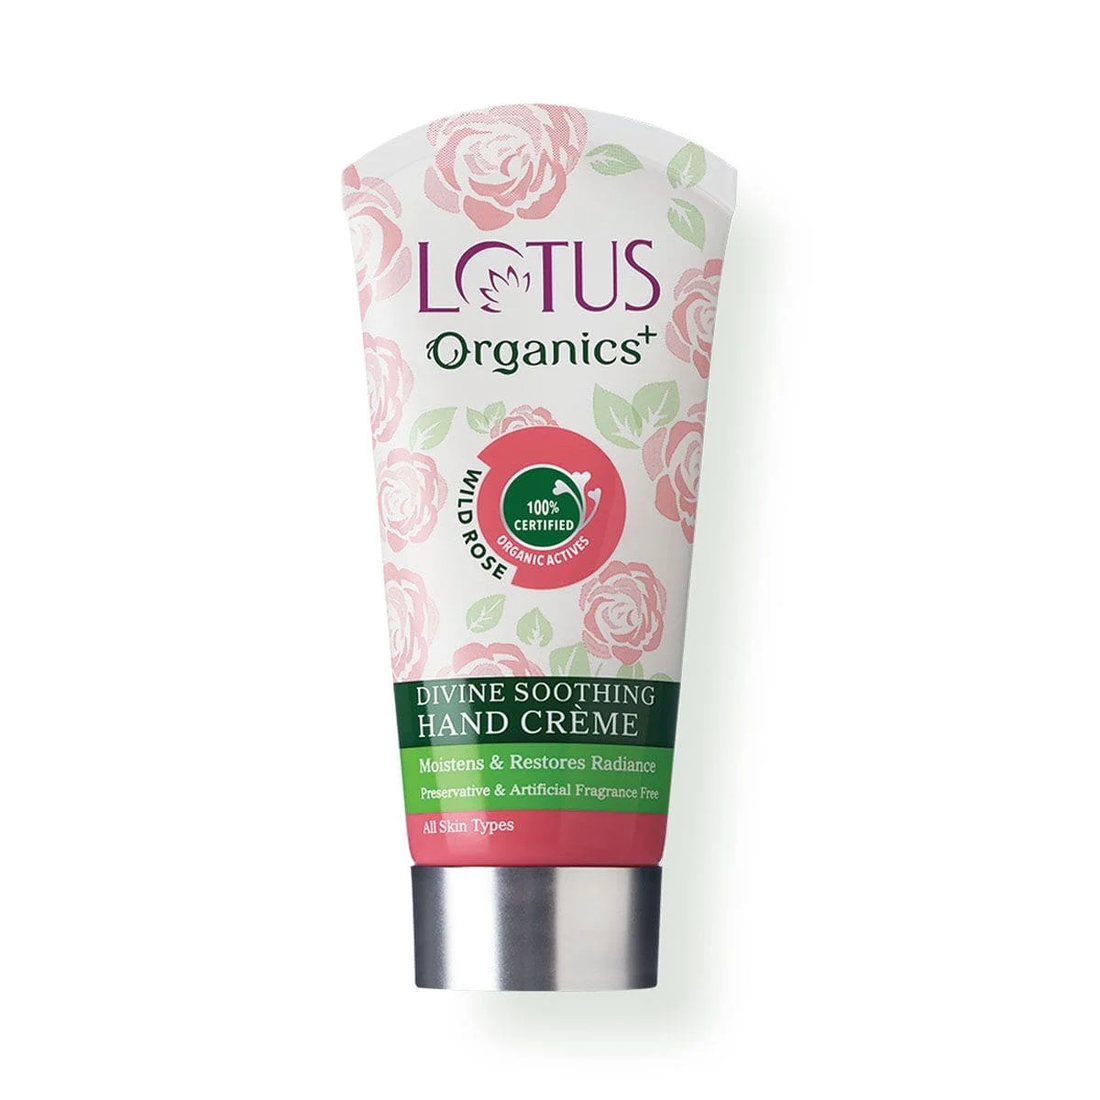 Divine Soothing Hand Creme Wild Rose ( Complimentary ) - Lotus Organics